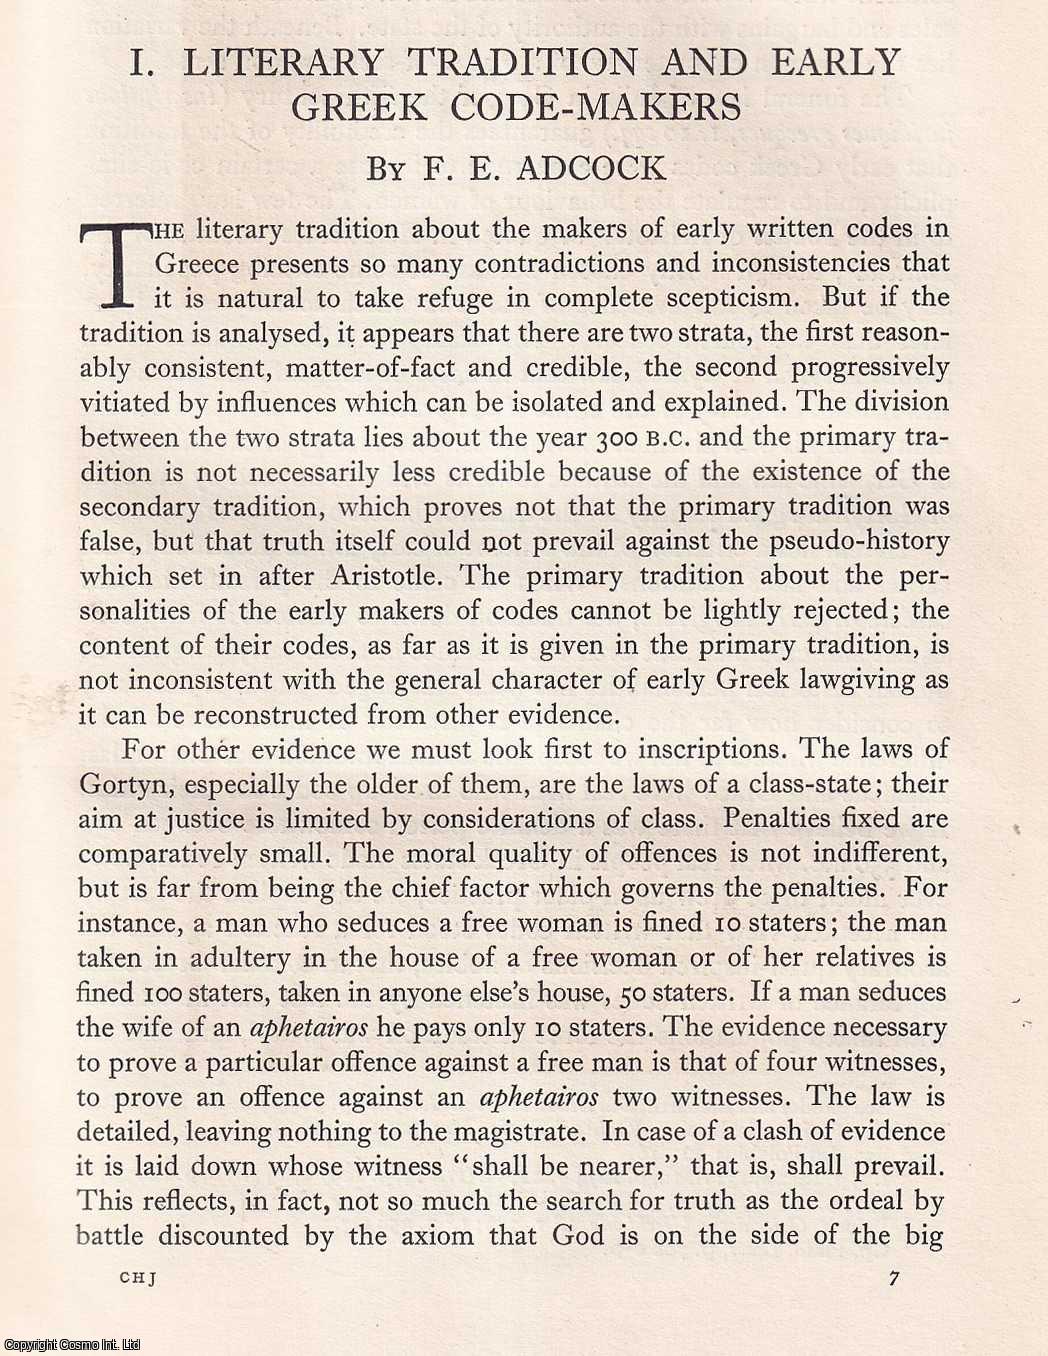 F.E. Adcock - Literary Tradition and Early Greek Code-Makers. An original article from the Cambridge Historical Journal, 1930.